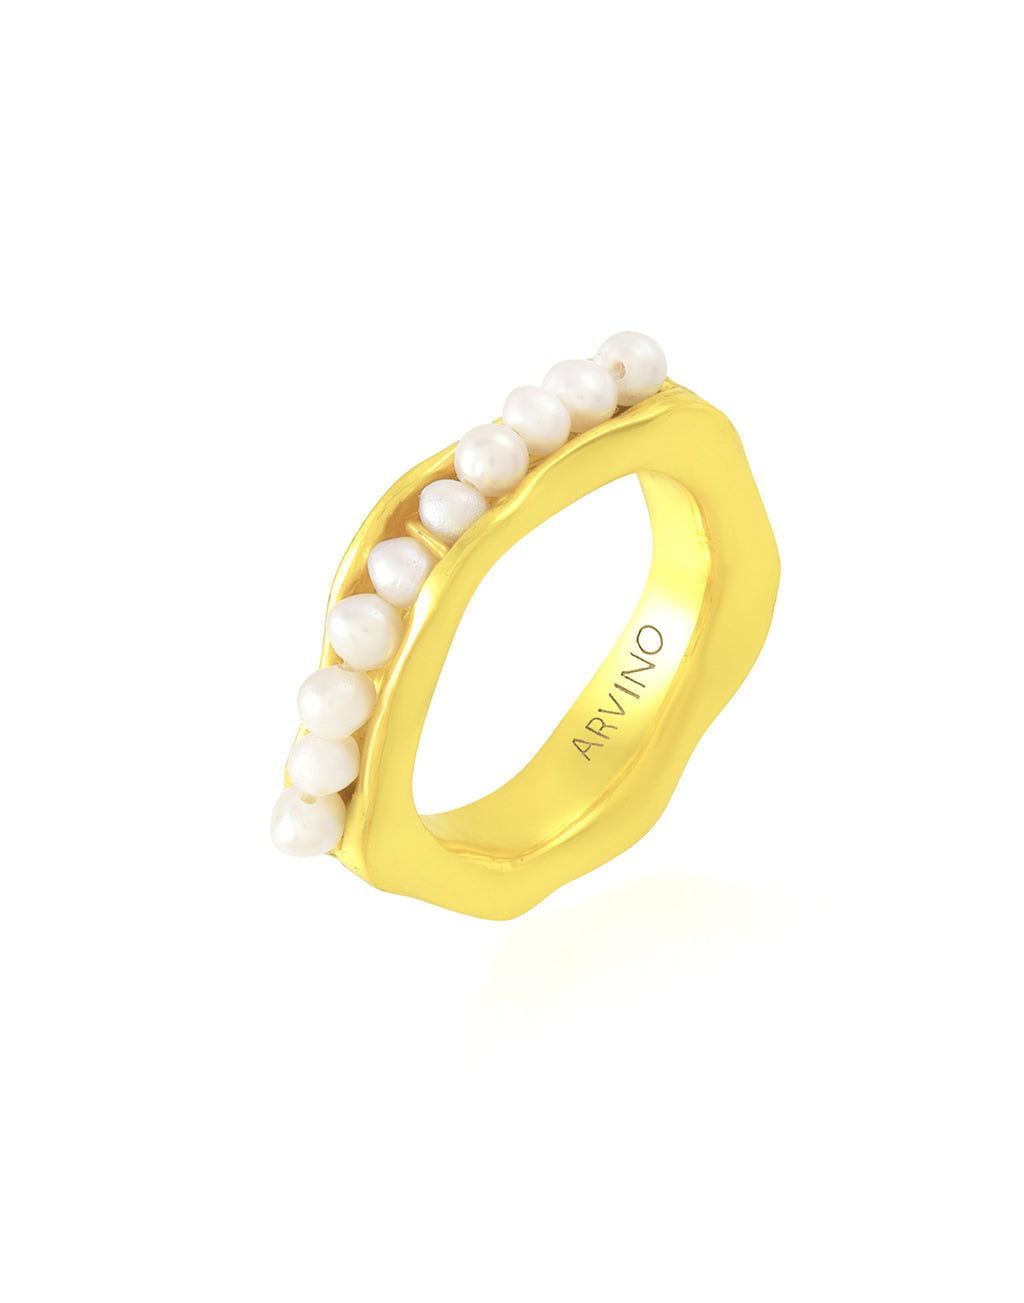 Starlet Ring - Statement Rings - Gold-Plated & Hypoallergenic Jewellery - Made in India - Dubai Jewellery - Dori